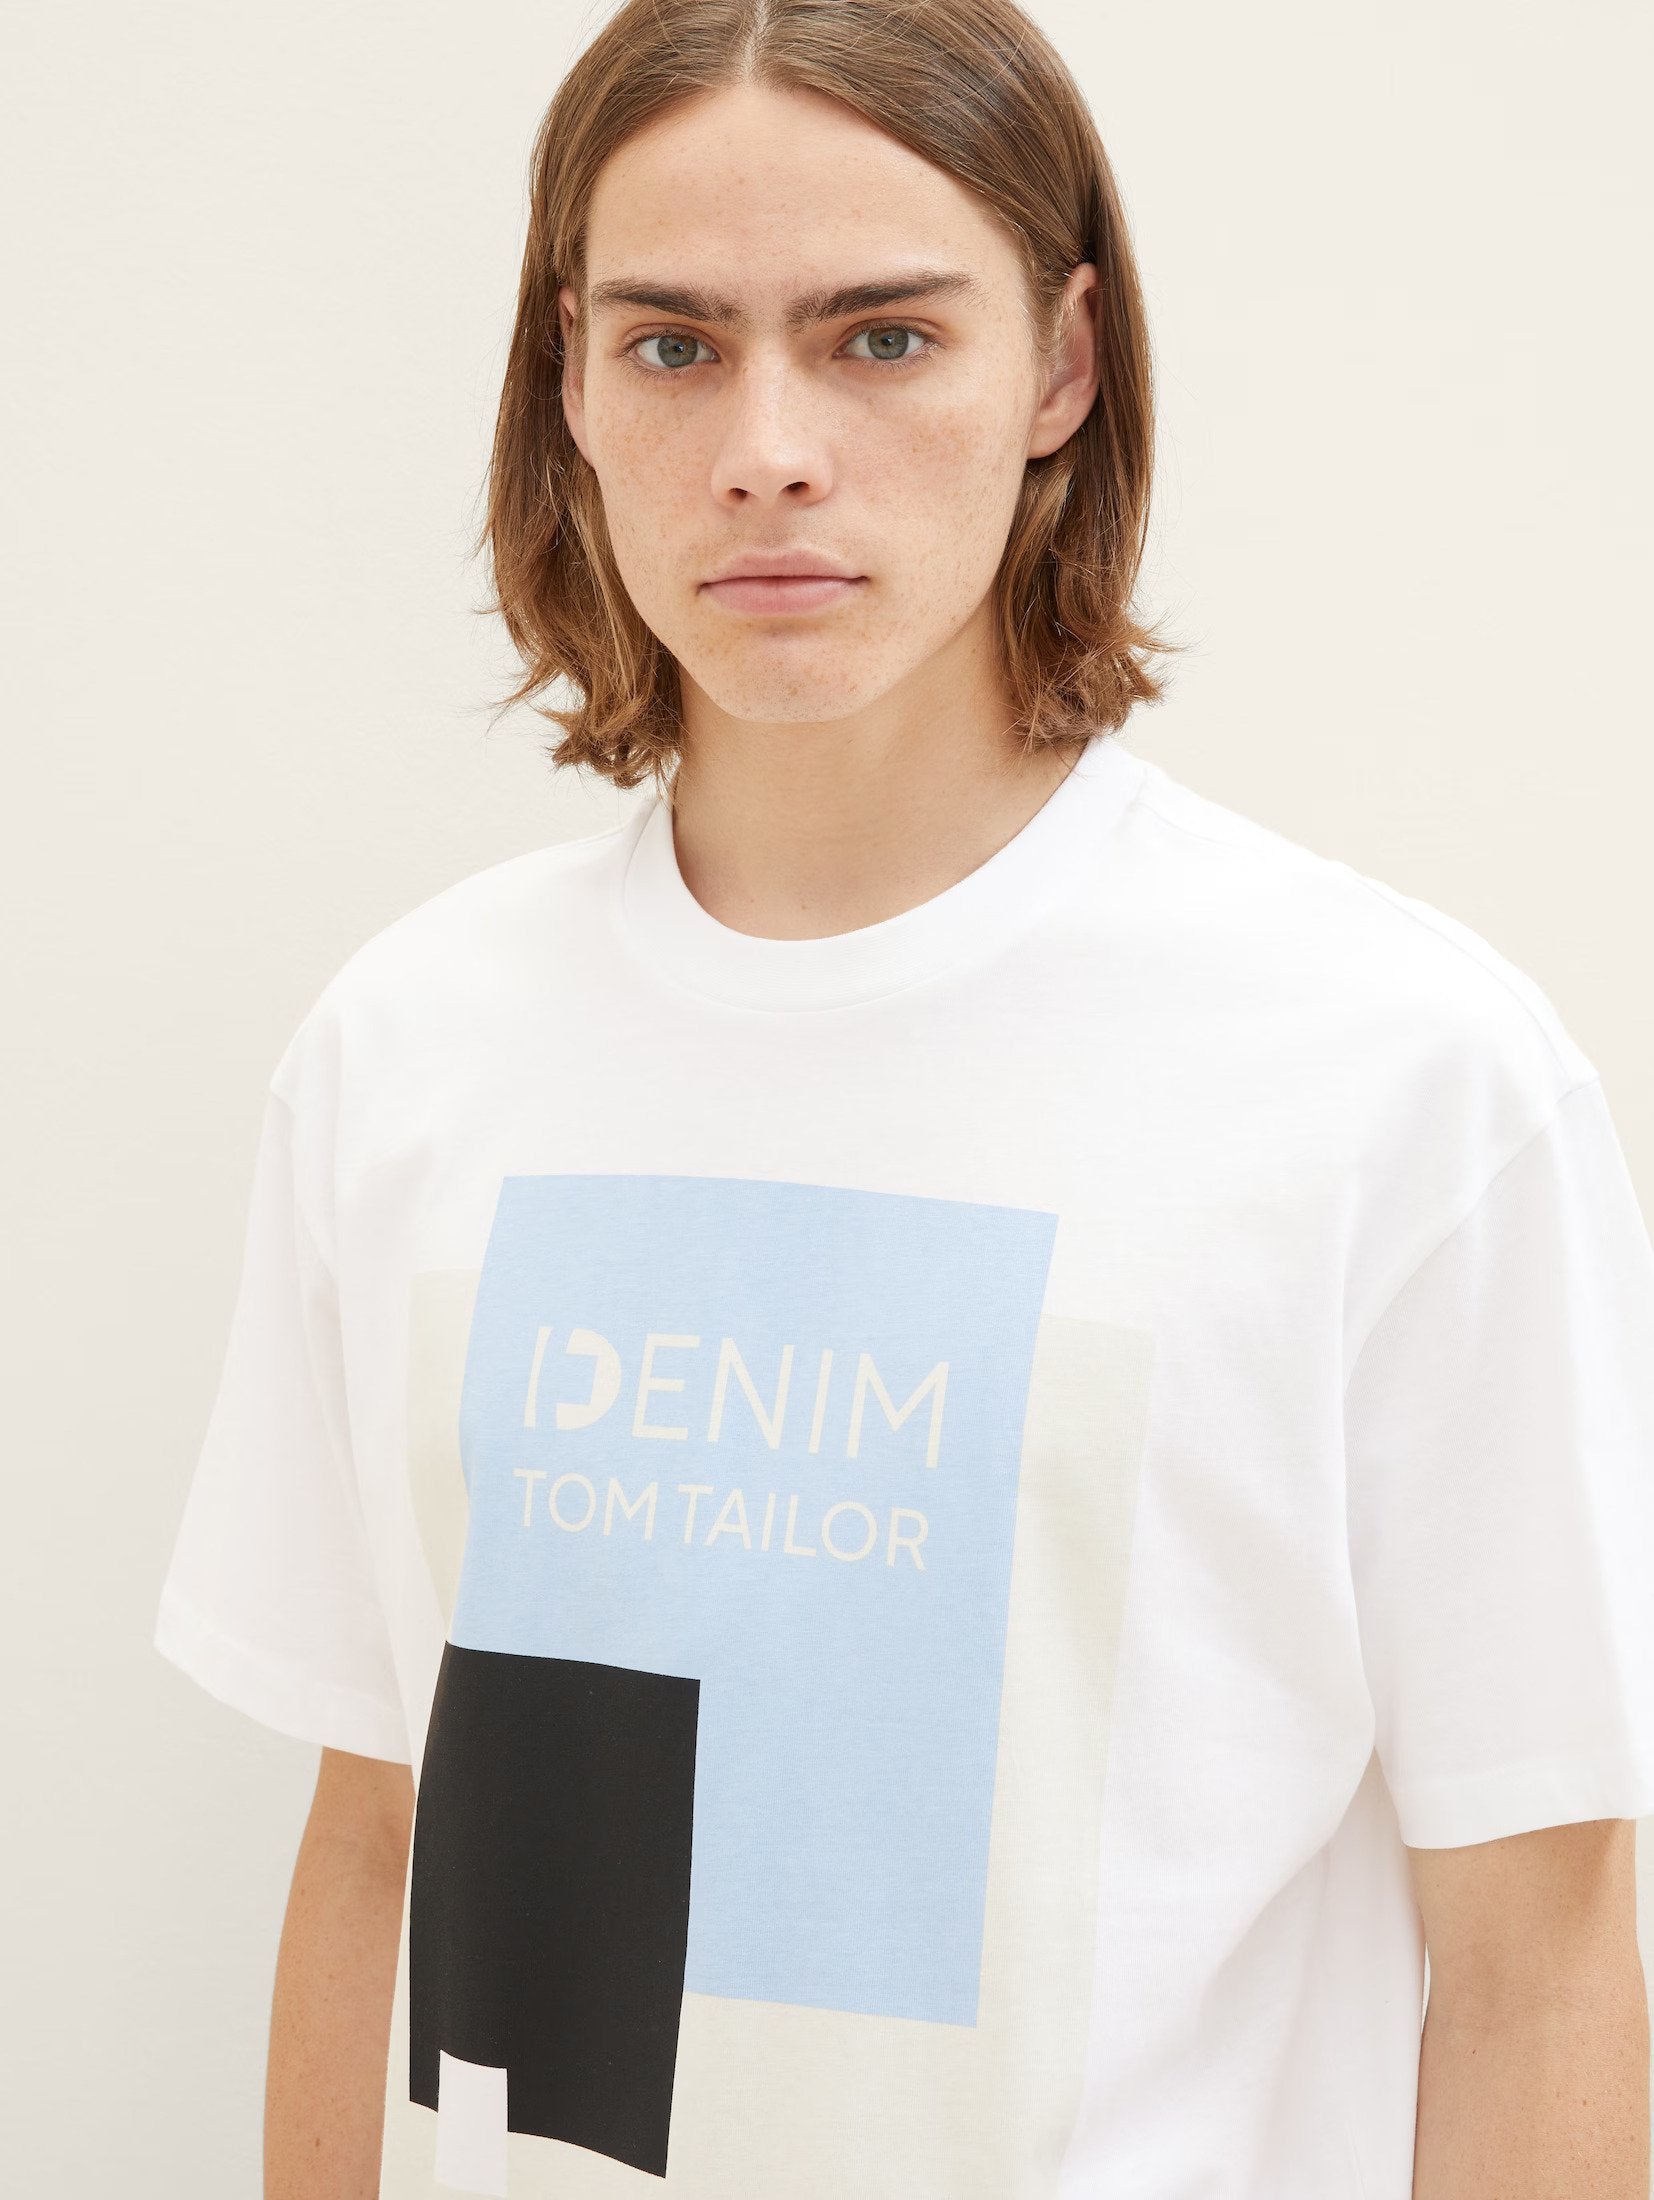 Tom Tailor White T-Shirt with a Print